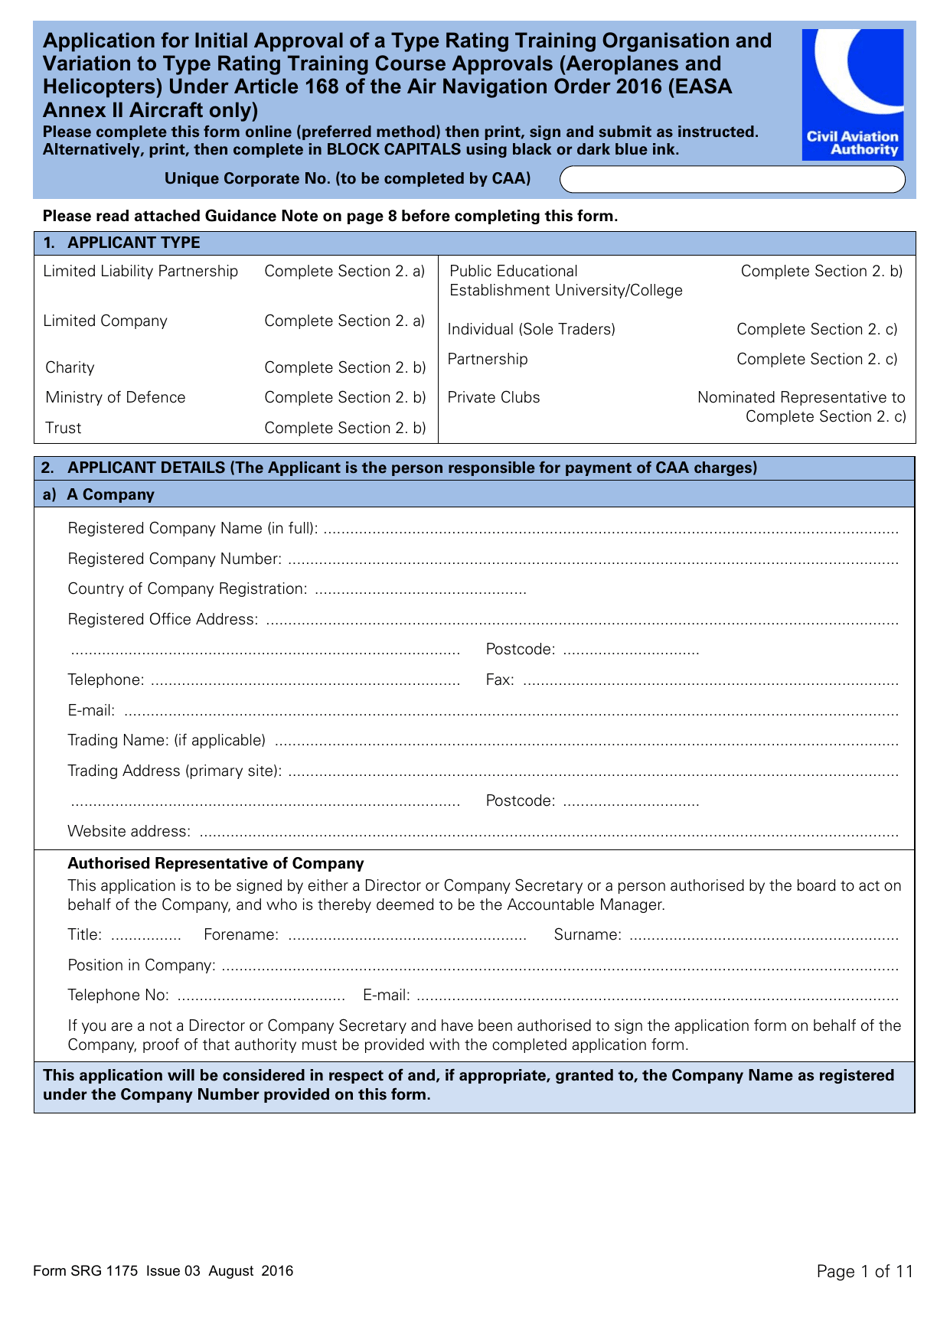 Form SRG1175 Application for Initial Approval of a Type Rating Training Organization and Variation to Type Rating Training Course Approvals (Aeroplanes and Helicopters) Under Article 168 of the Air Navigation Order 2016 (Easa Annex II Aircraft Only) - United Kingdom, Page 1